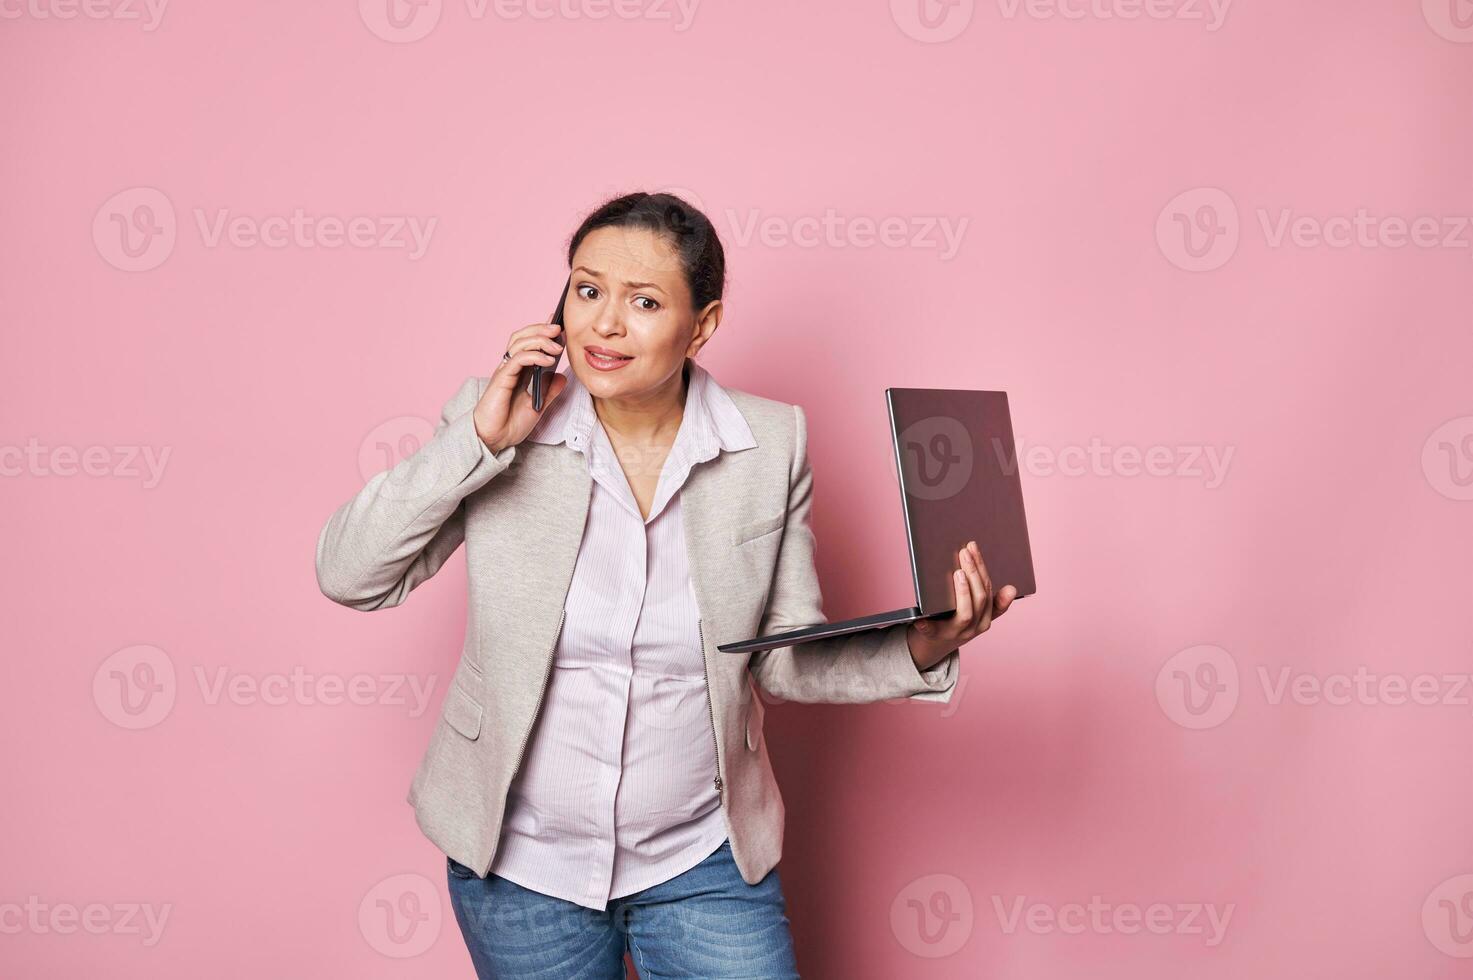 Pregnant business woman, holding laptop, talking on mobile phone, expressing disappointment, isolated pink background photo